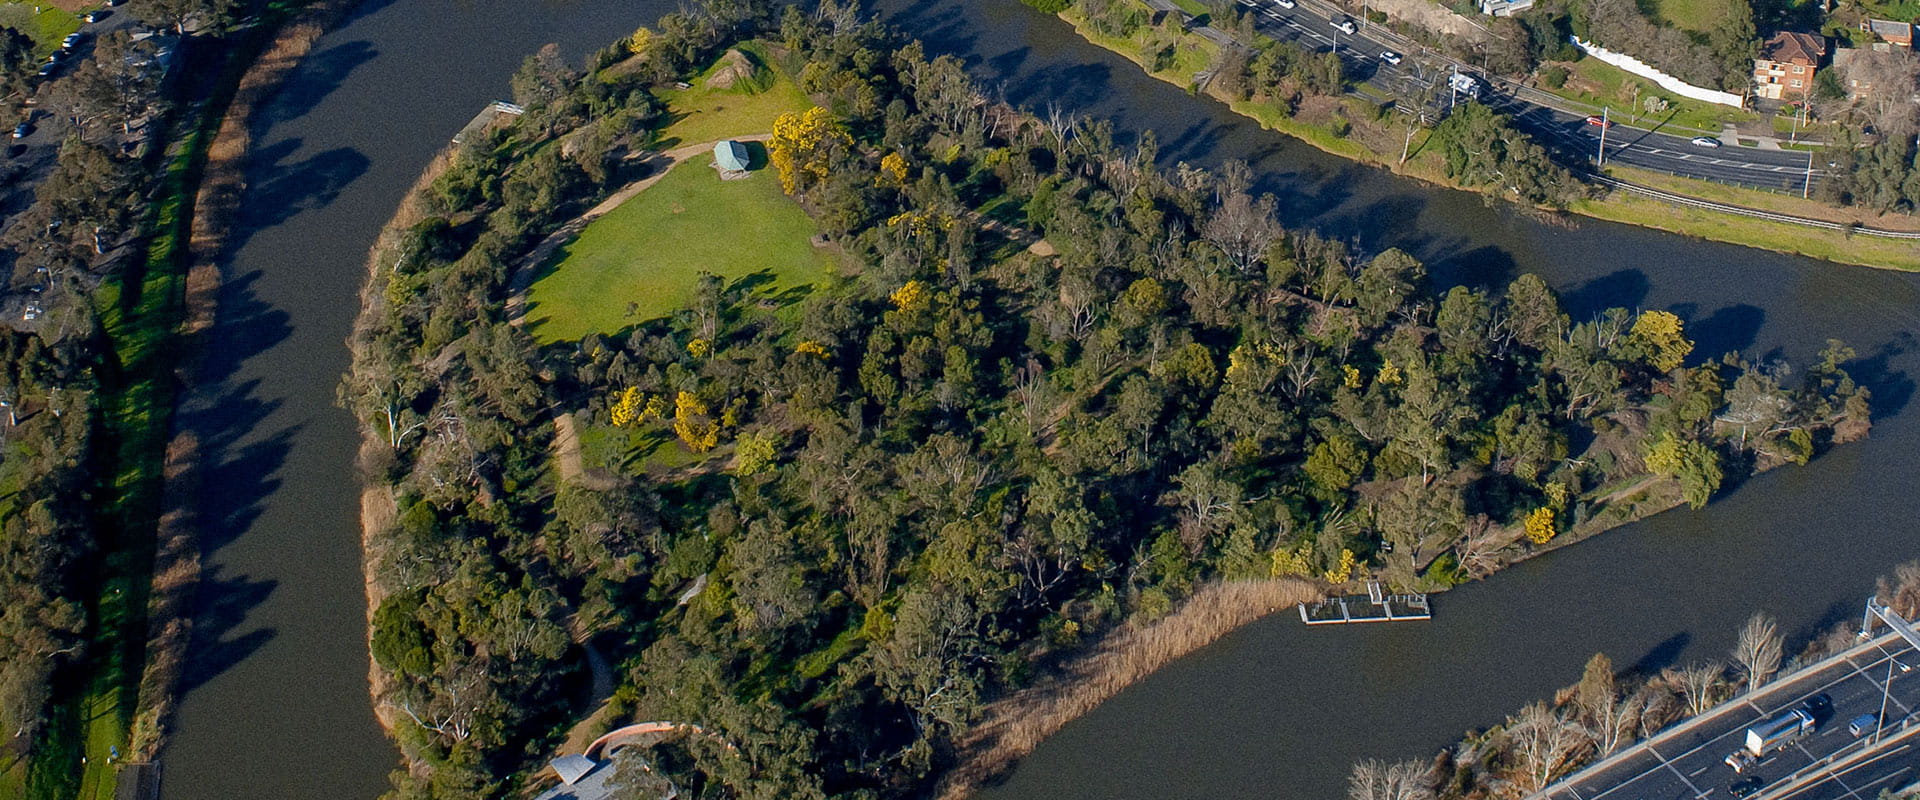 An aerial view of a tree and grass-covered island in the middle of the Yarra River